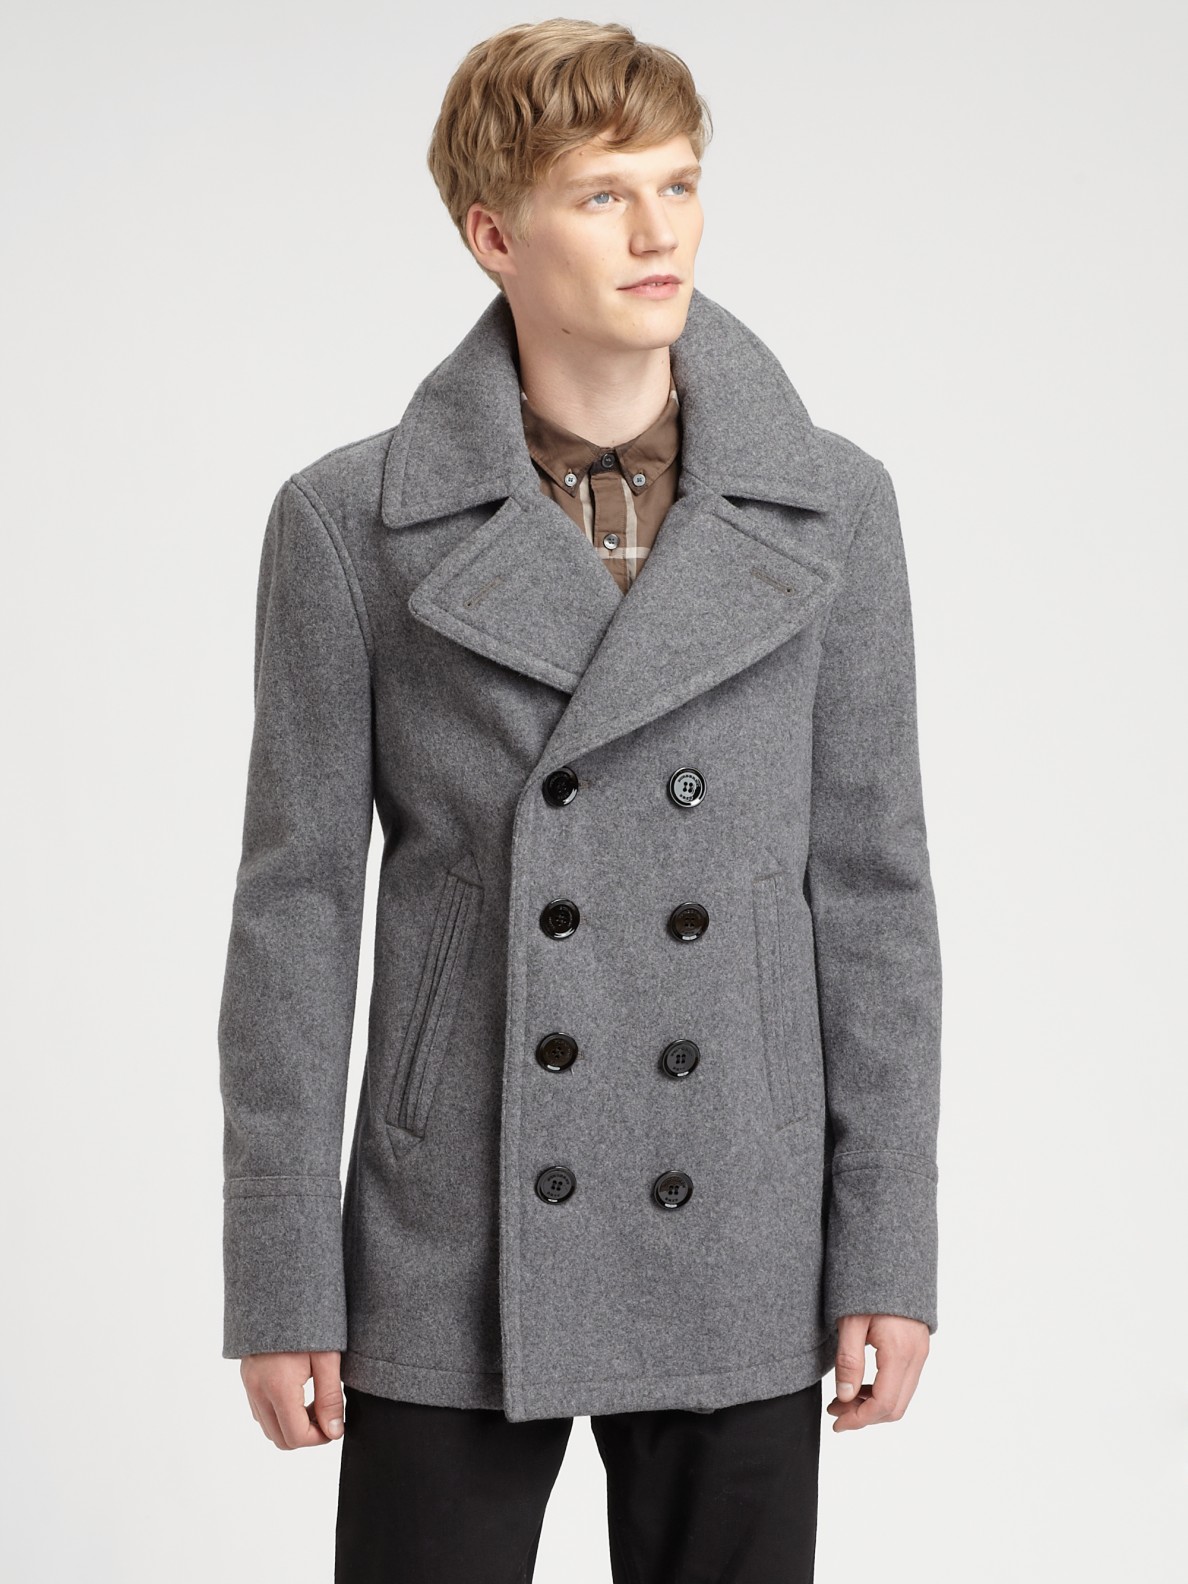 Lyst - Burberry Brit Eckford Doublebreasted Wool Coat in Gray for Men